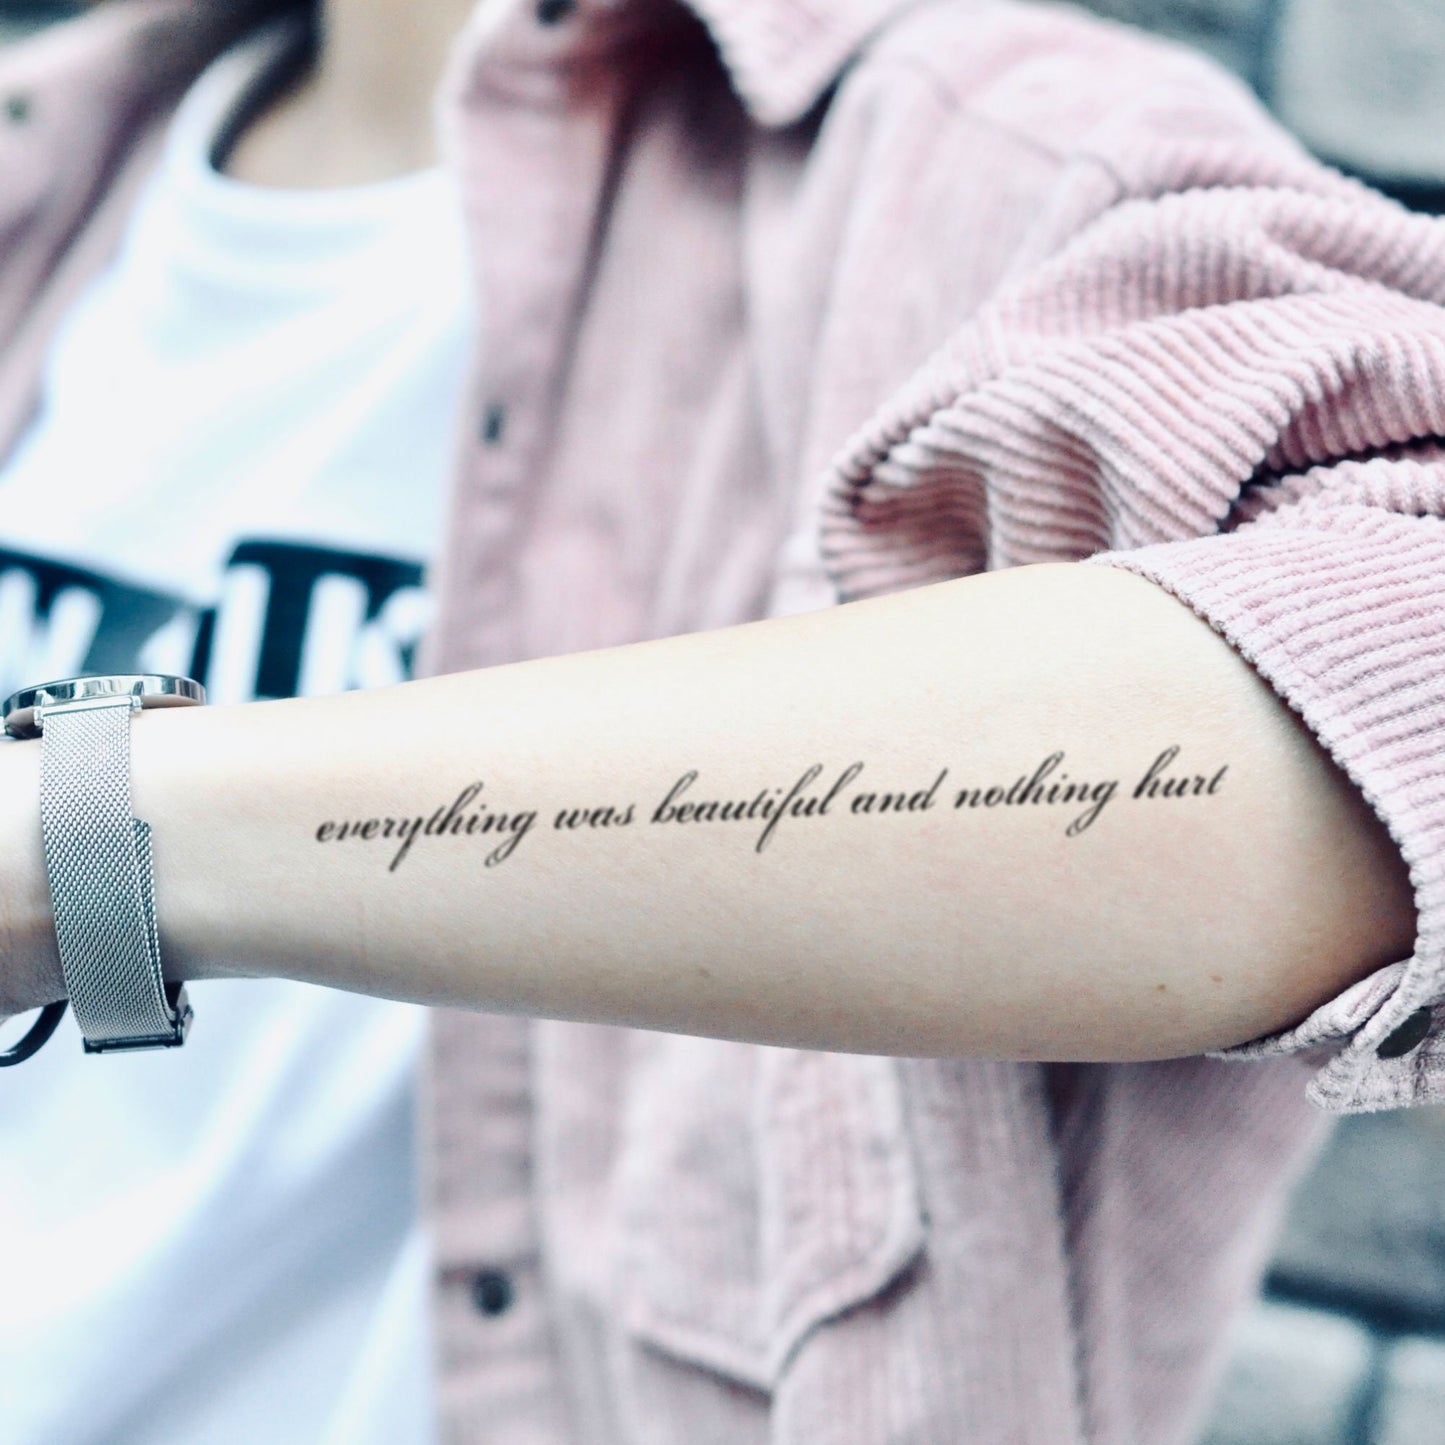 fake medium everything was beautiful and nothing hurt lettering temporary tattoo sticker design idea on forearm